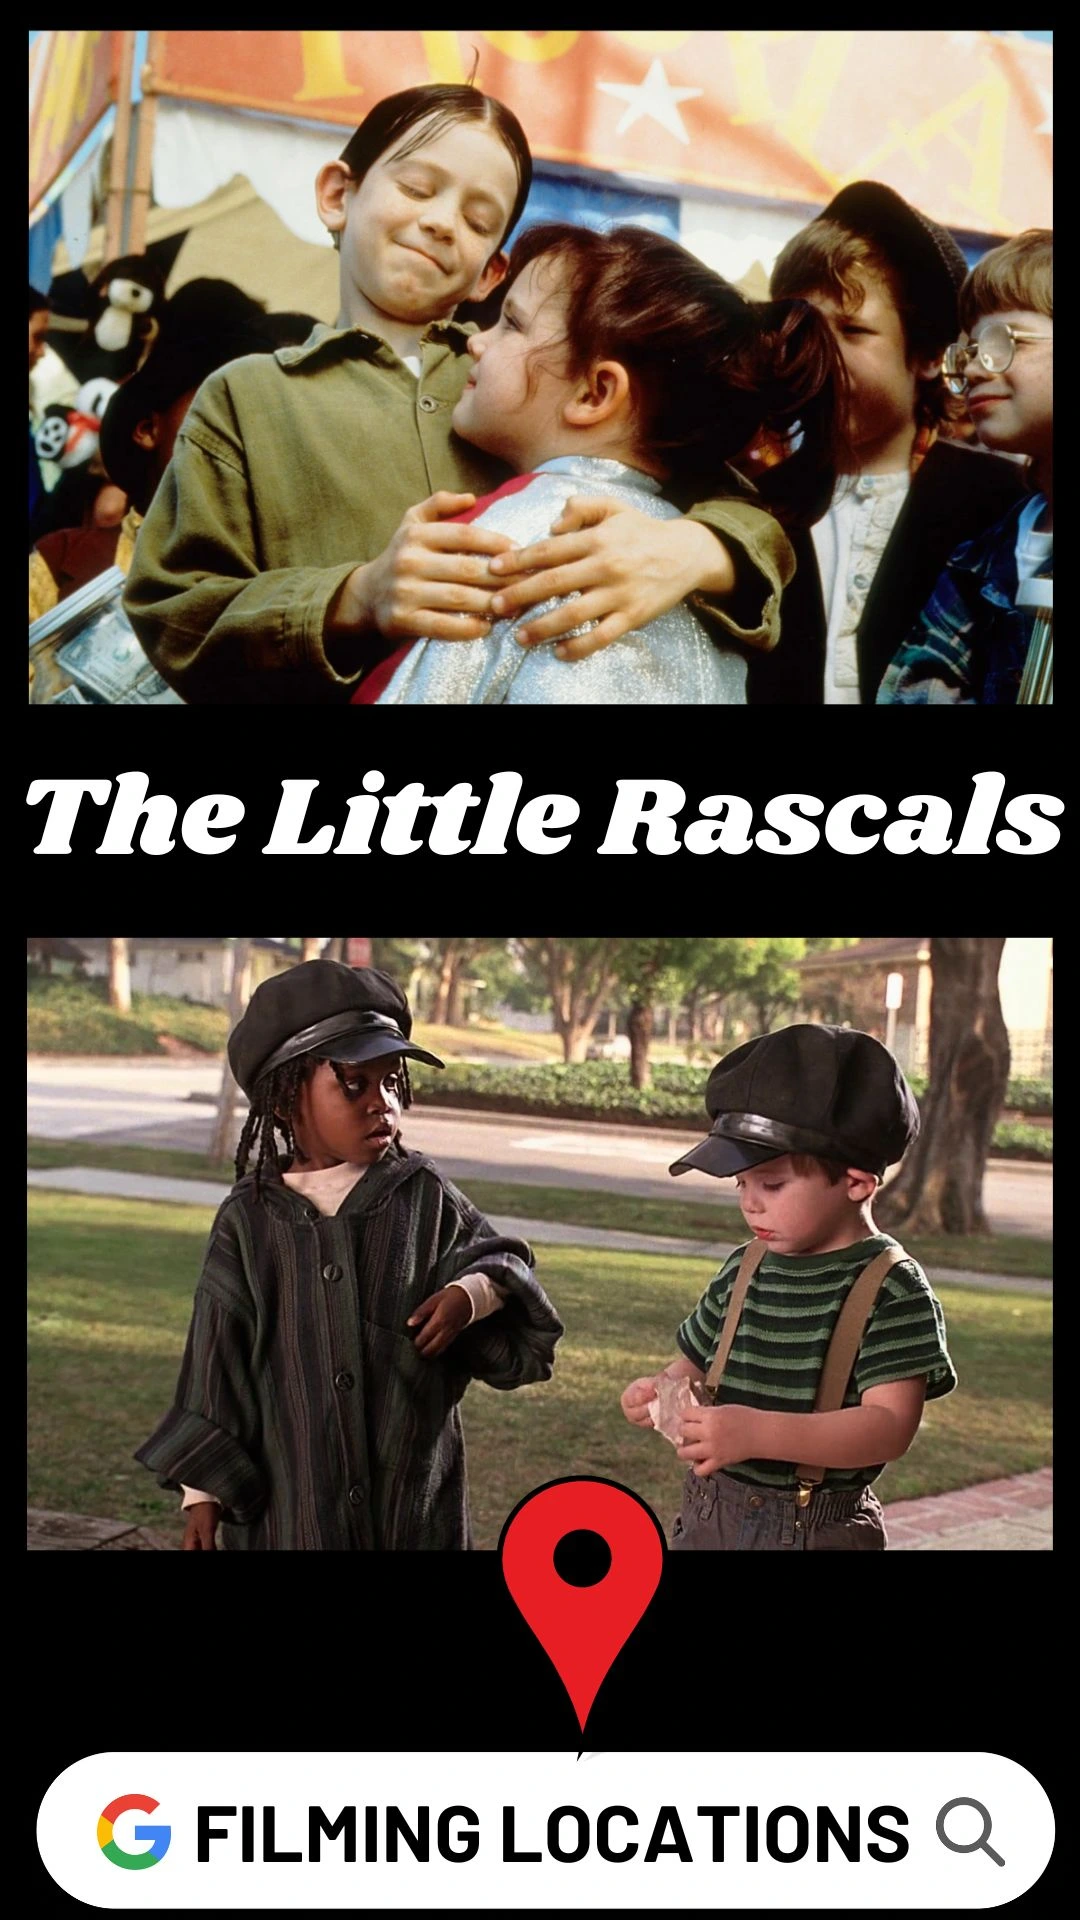 The Little Rascals Filming Locations